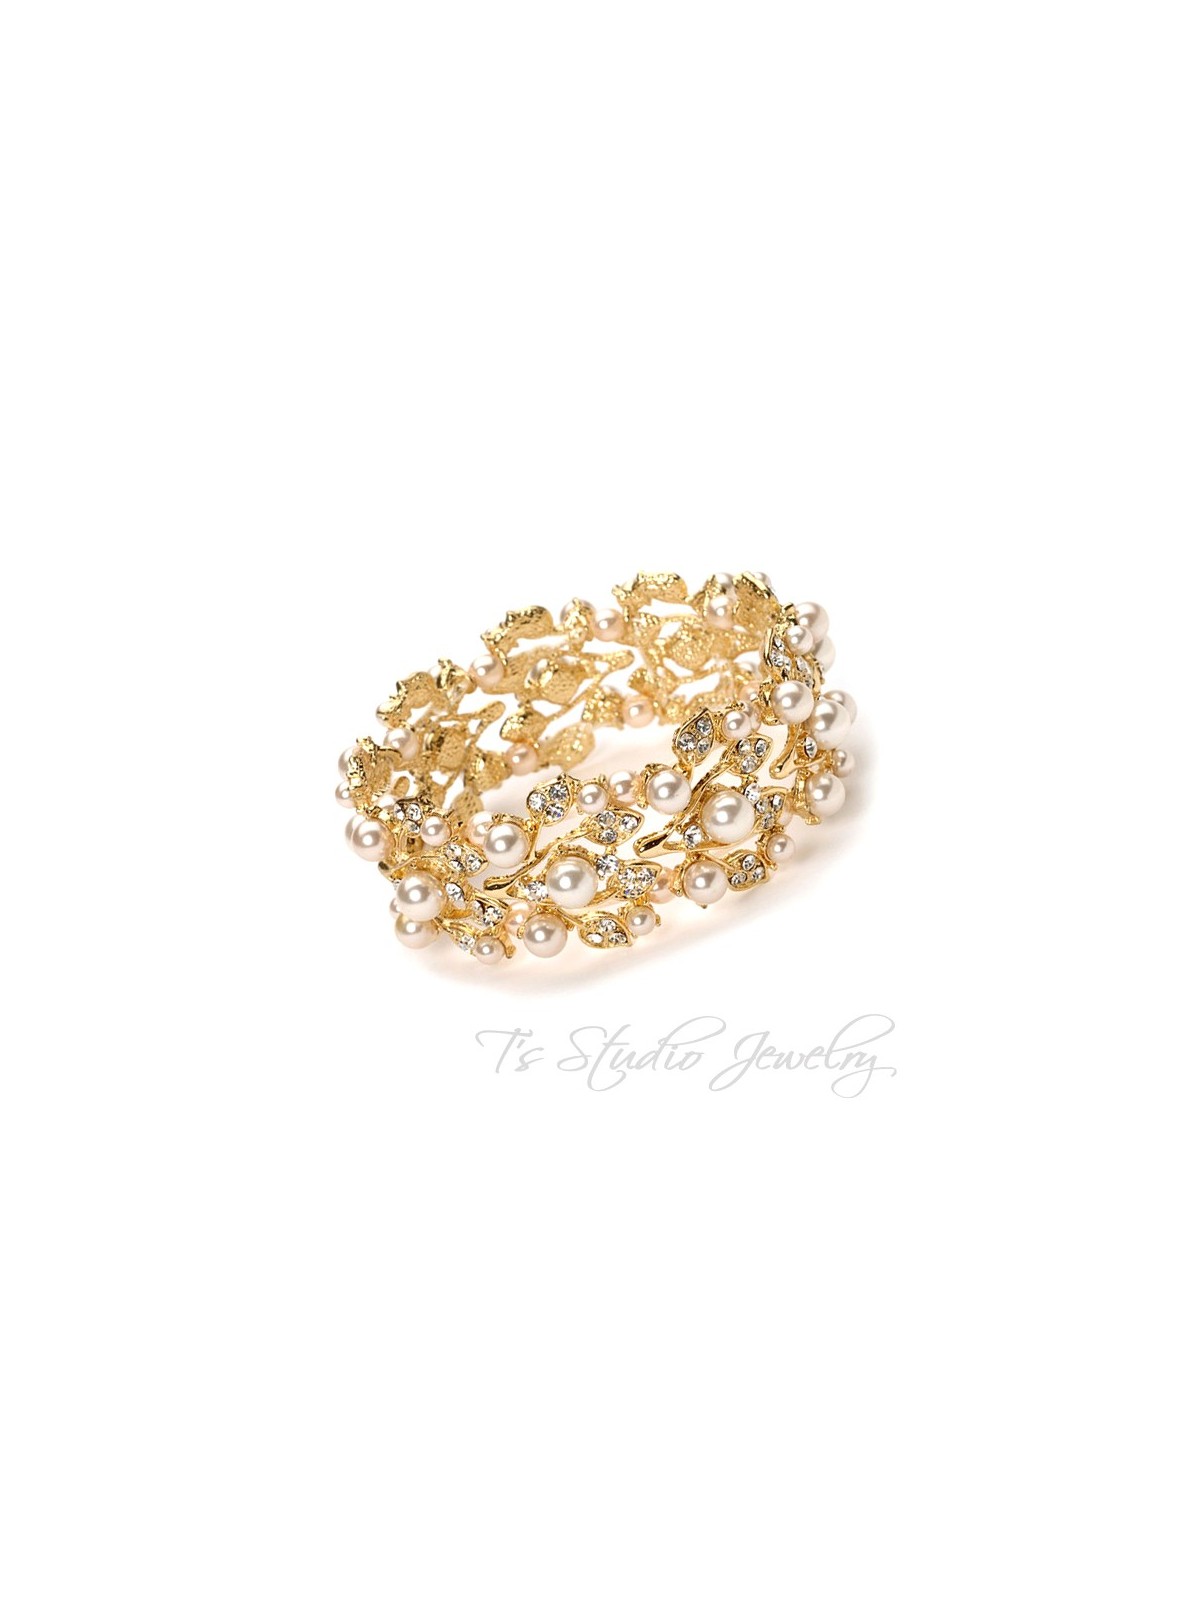 Gold Pearl and Crystal Bridal Cuff Bracelet